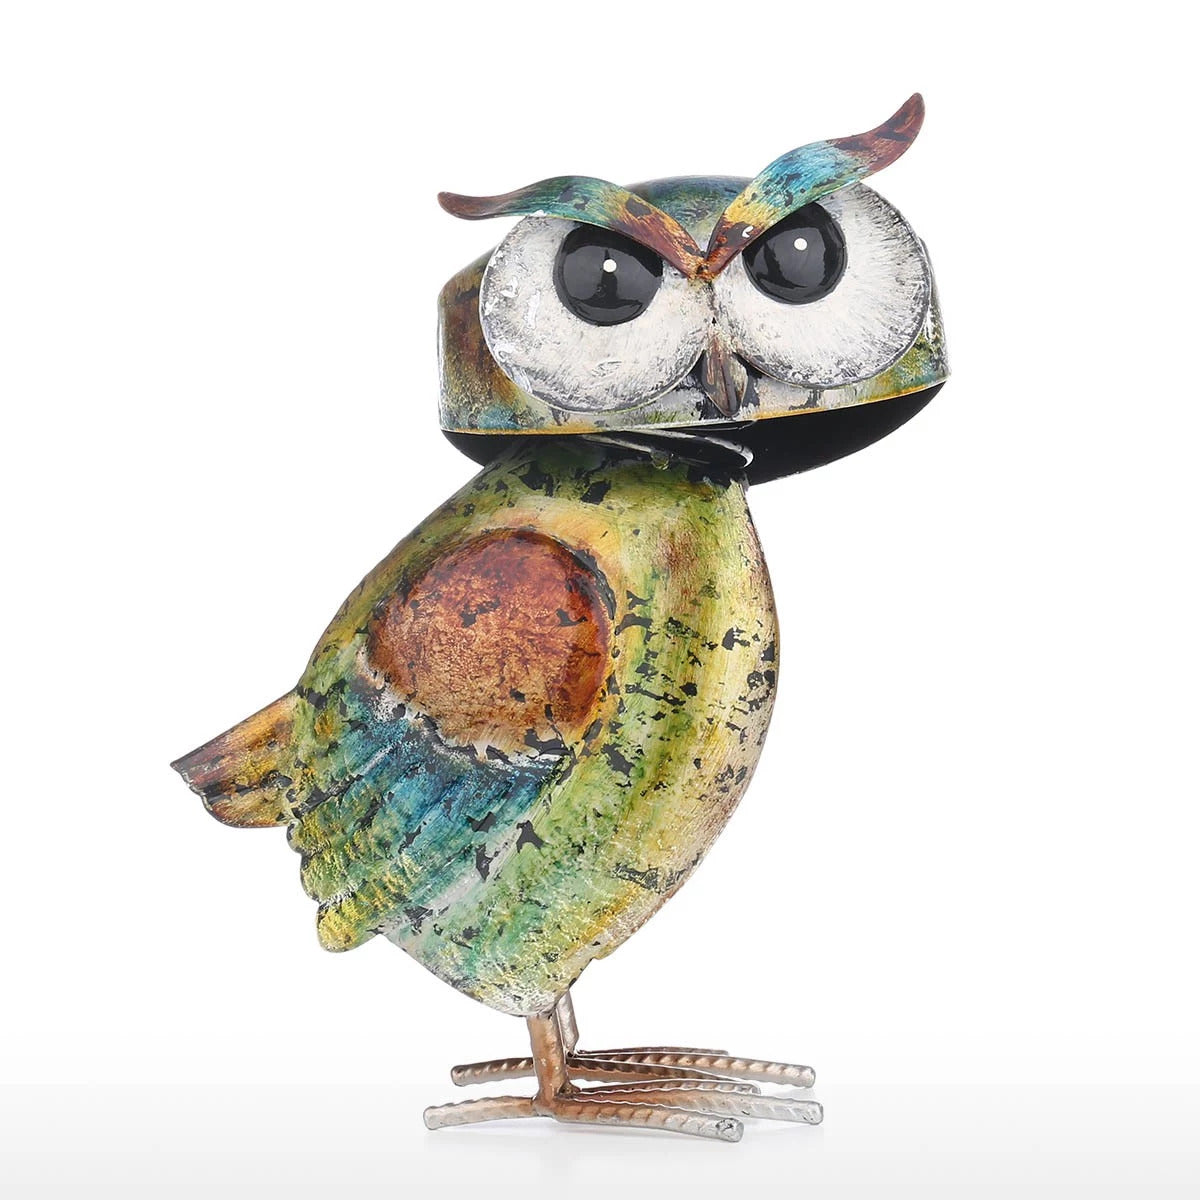 Colorful Metal Owl Sculpture to Decor and Ornaments or Owl Gifts